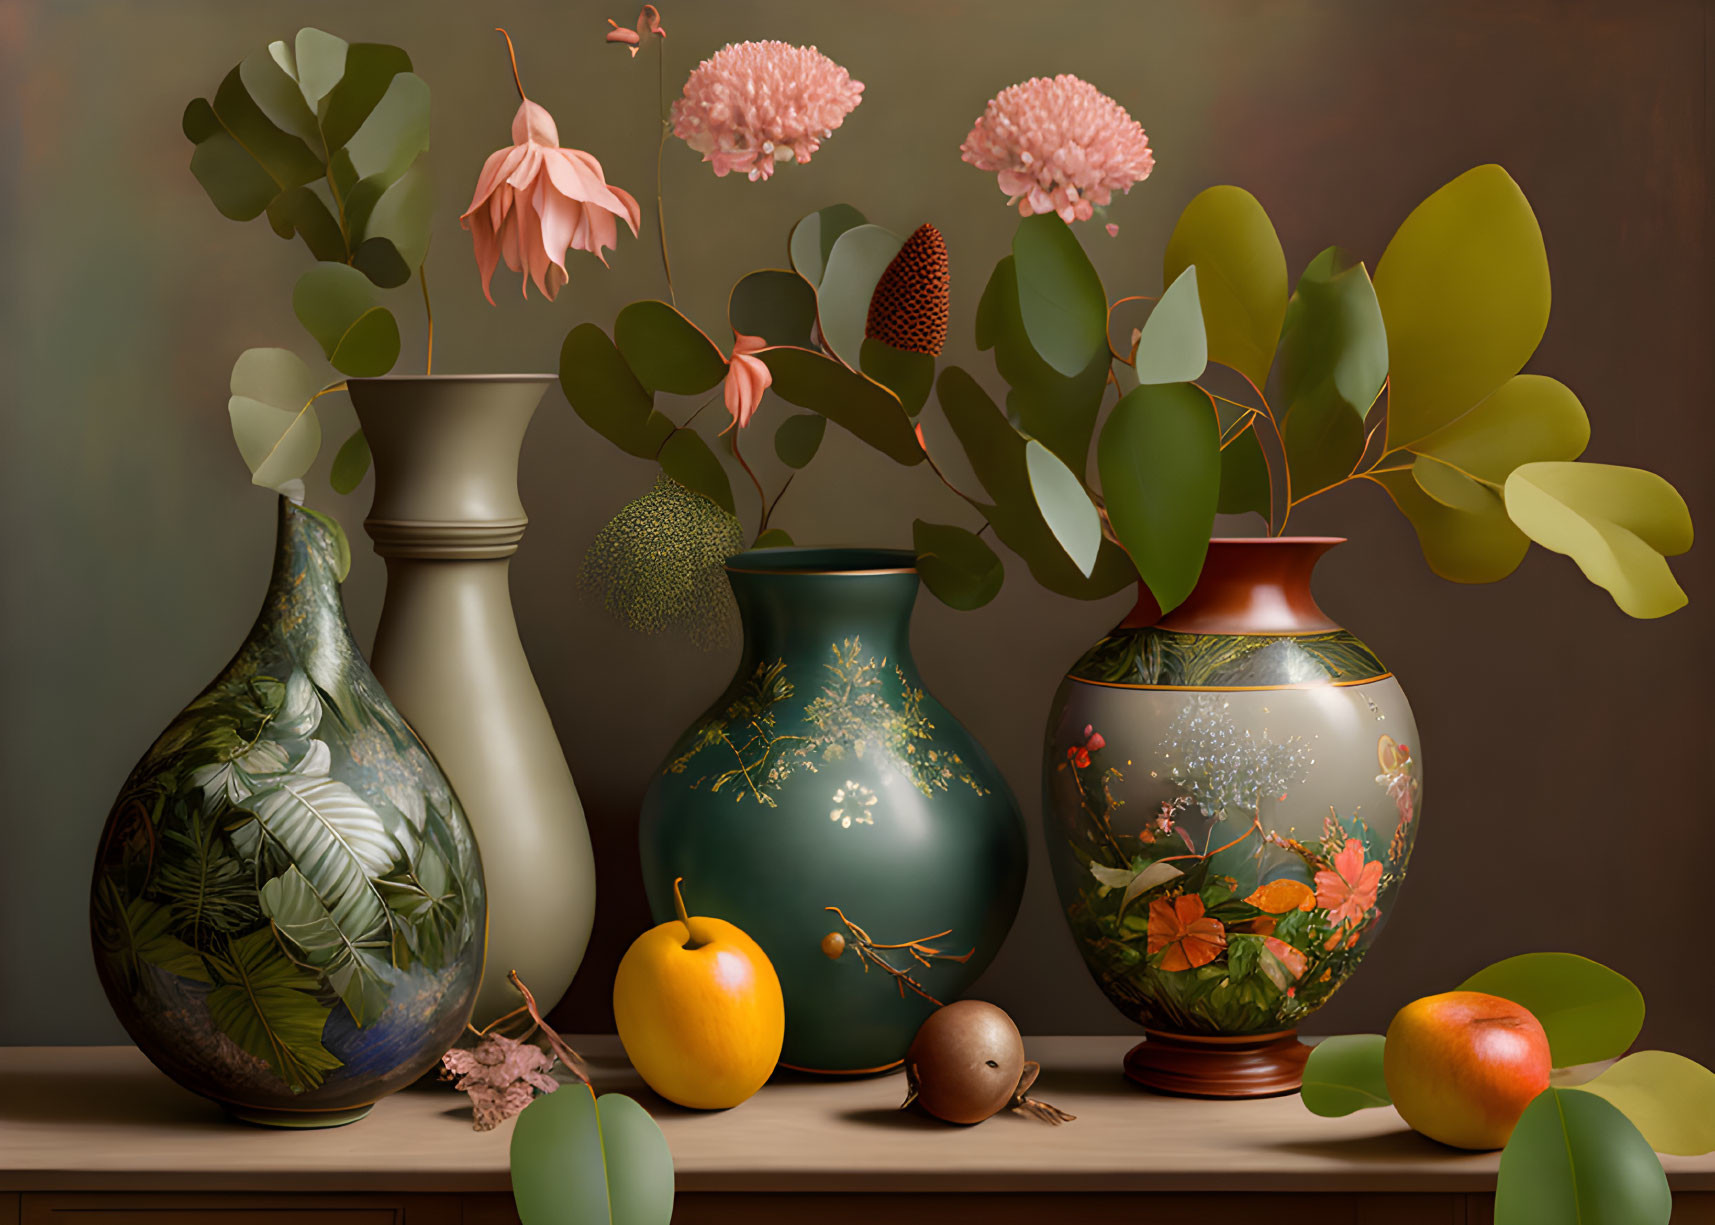 Decorative vases with flowers, leaves, and fruit on table.